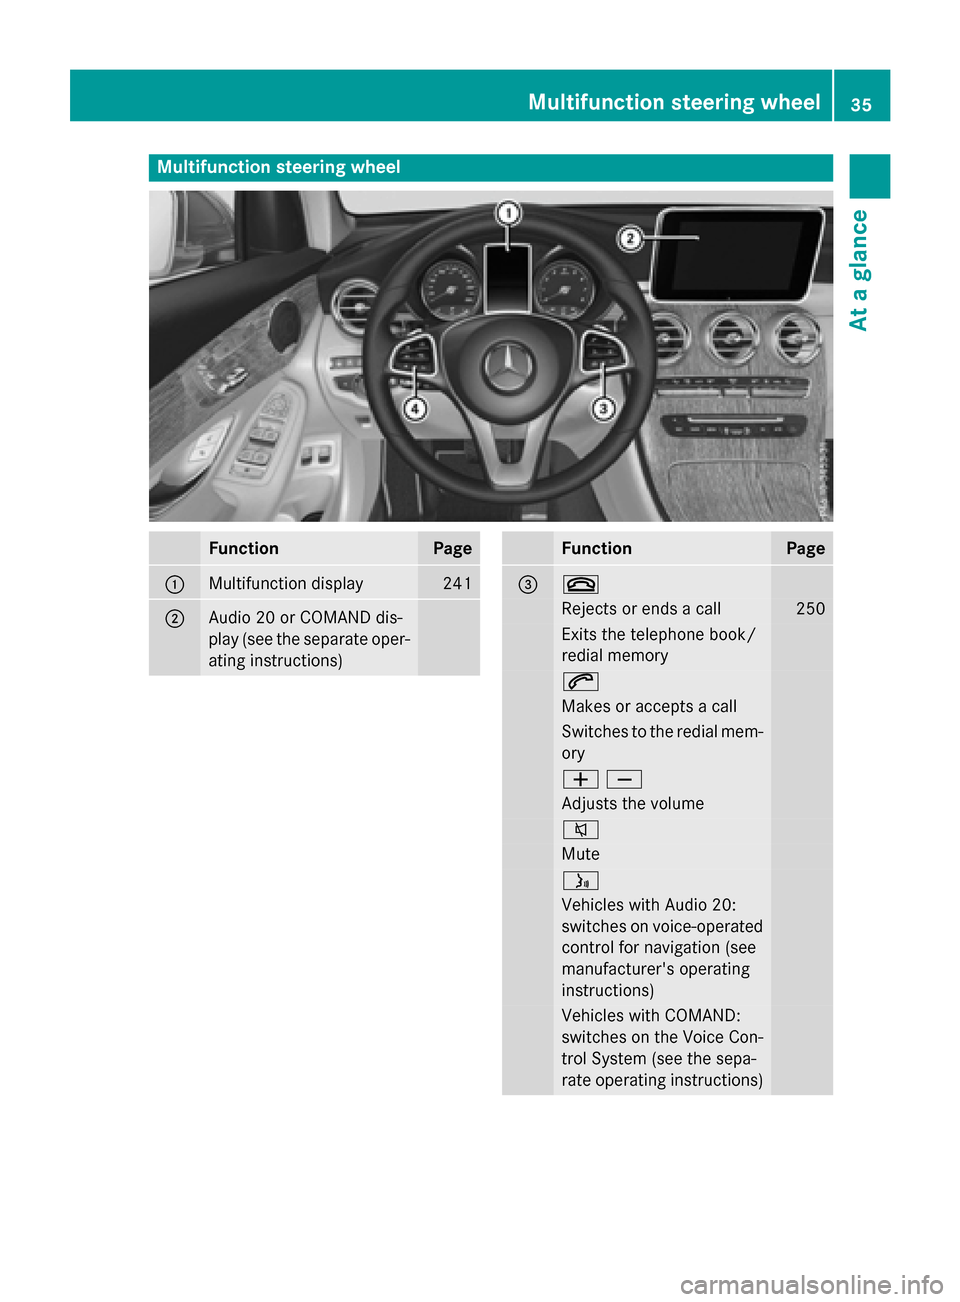 MERCEDES-BENZ GLC-Class 2016 X253 Owners Manual Multifunction steering wheel
FunctionPage
:Multifunction display241
;Audio 20 or COMAND dis-
play (see the separate oper-
ating instructions)
FunctionPage
=~
Rejects or ends a call250
Exits the teleph